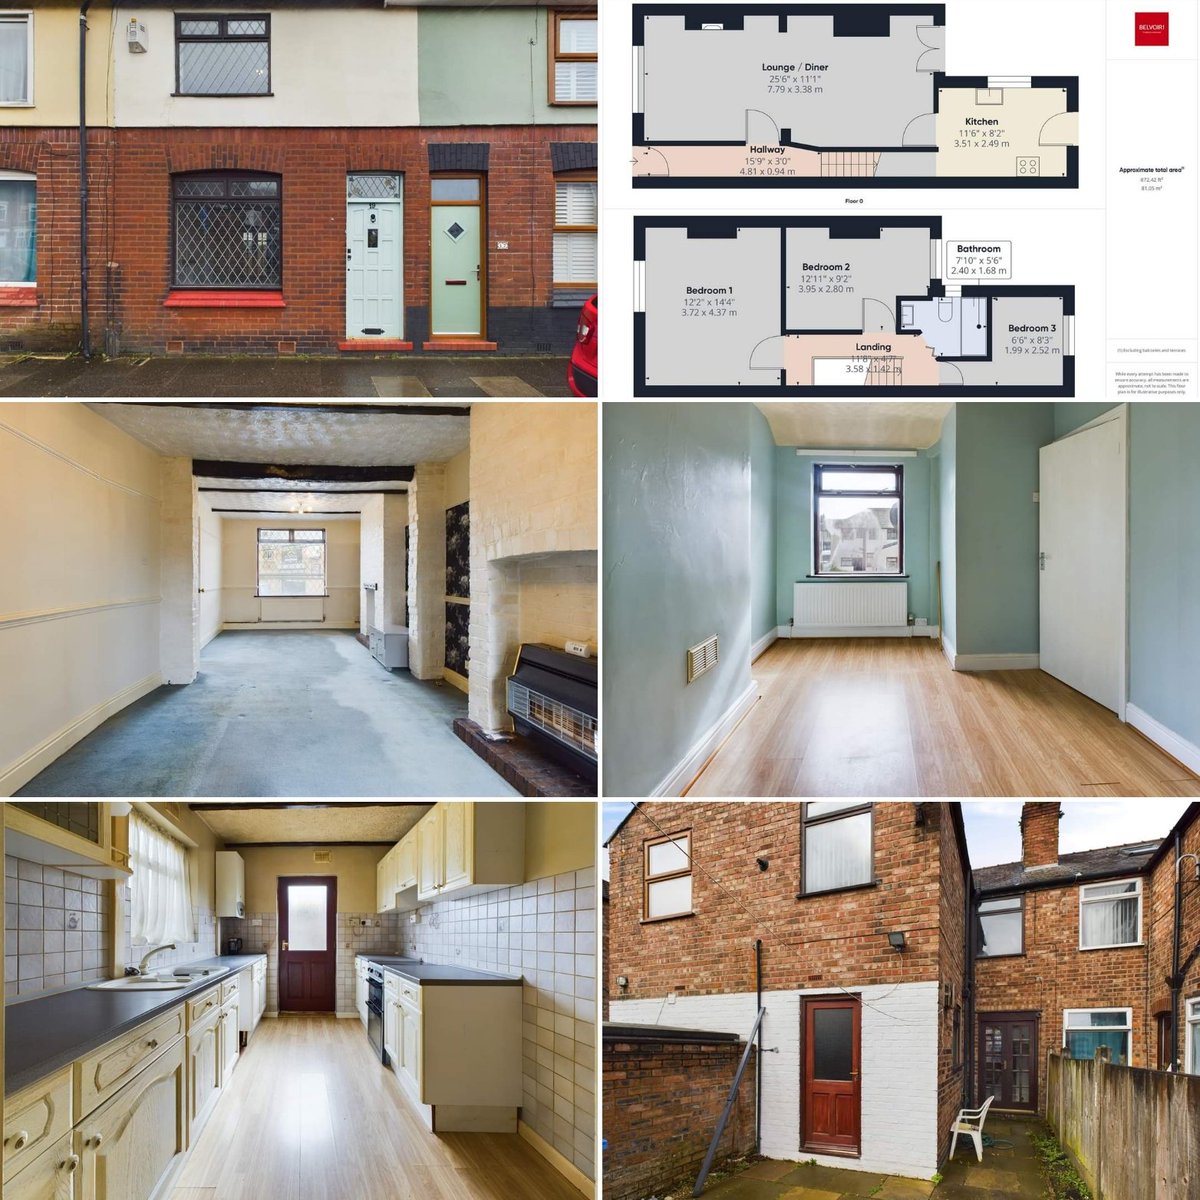 ✨✨✨New SALES Instruction✨✨✨ O'Leary Street, Orford, Warrington, WA2 Price : £140,000 🏘 Terraced House 🚗 Street Parking 👨‍👩‍👧‍👦 No Chain 🛏 3 Bedrooms Contact our friendly team on : Call : 01925 636 855 Email : sales.warrington@belvoir.co.uk